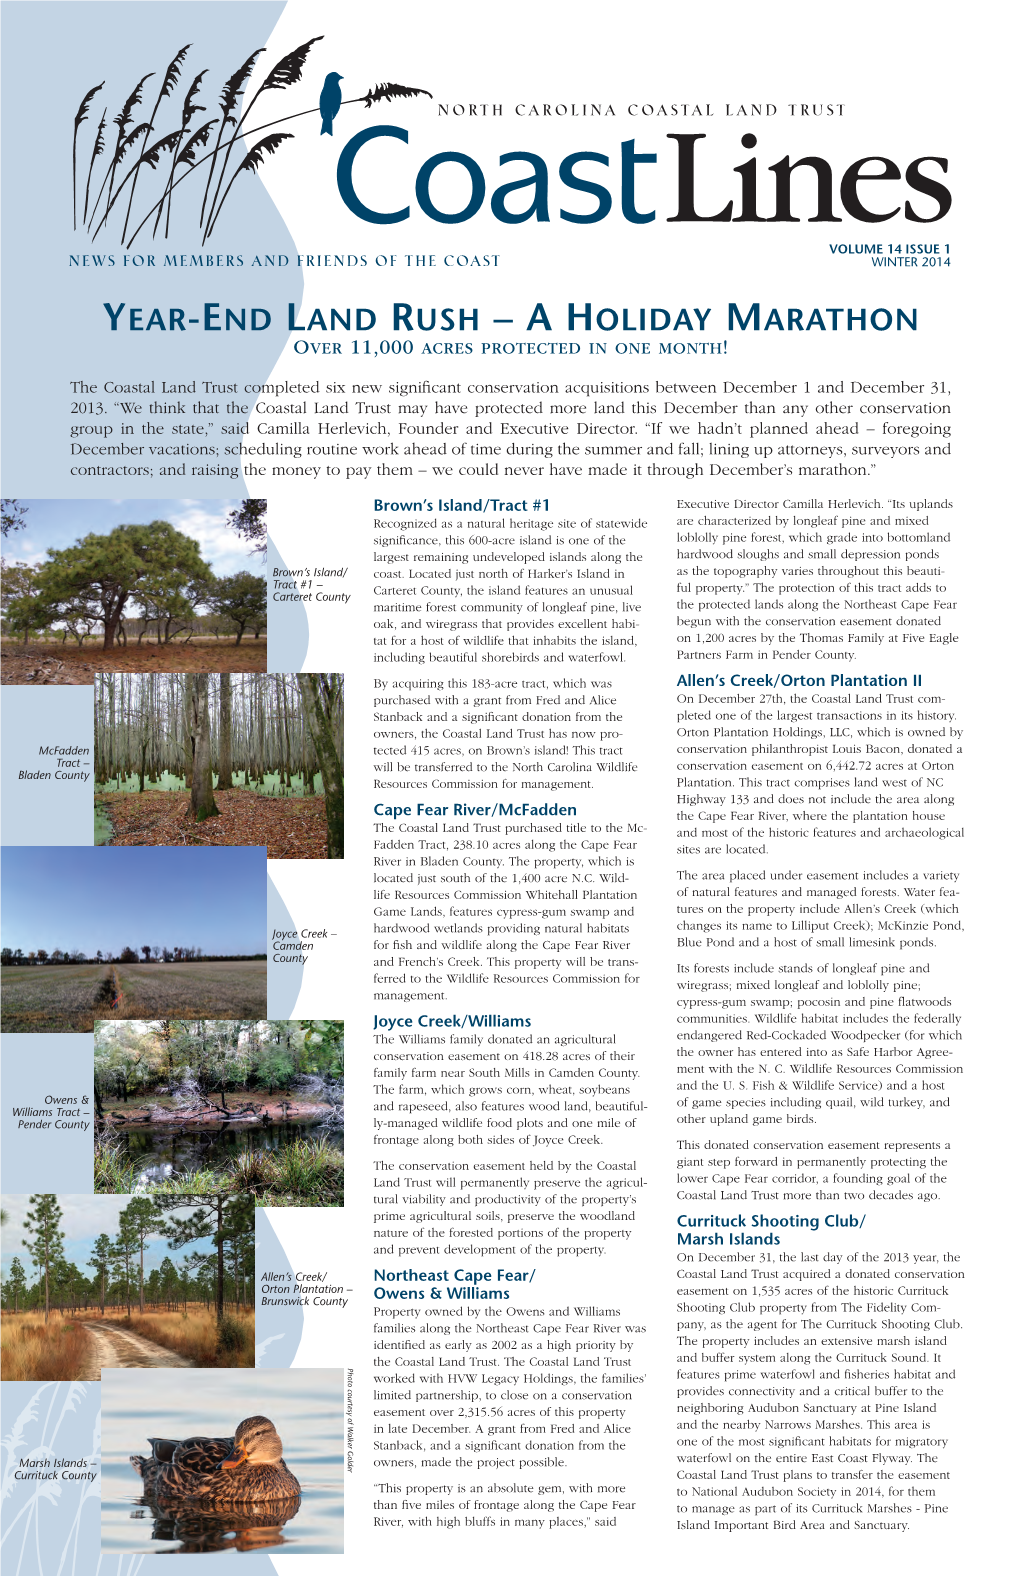 Year-End Land Rush – a Holiday Marathon Over 11,000 Acres Protected in One Month!